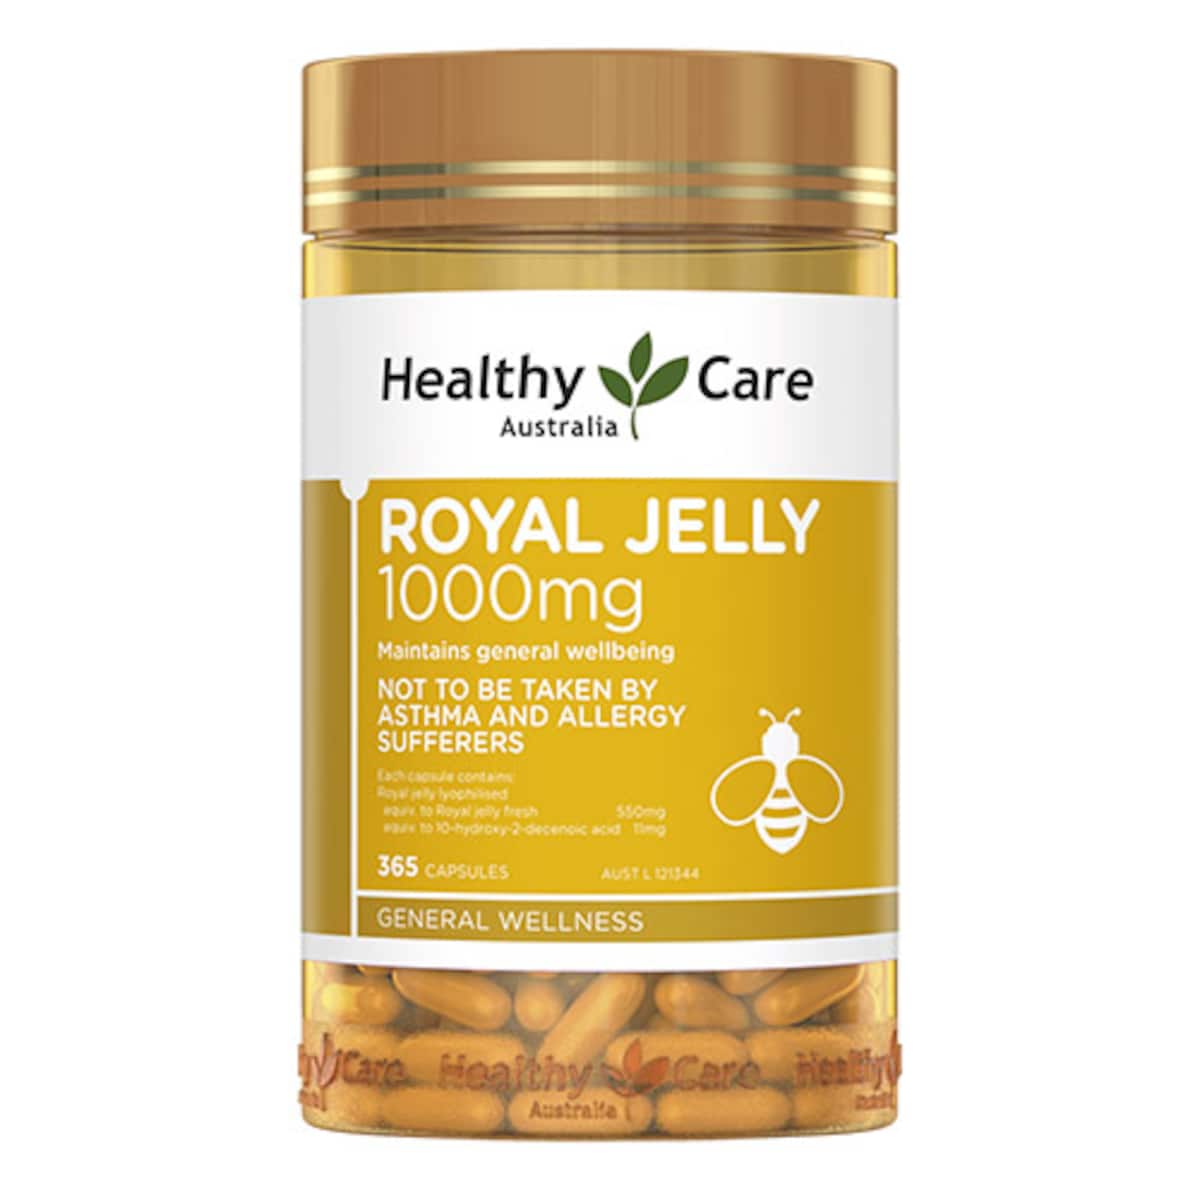 Healthy Care Royal Jelly 1000mg 365 Capsules